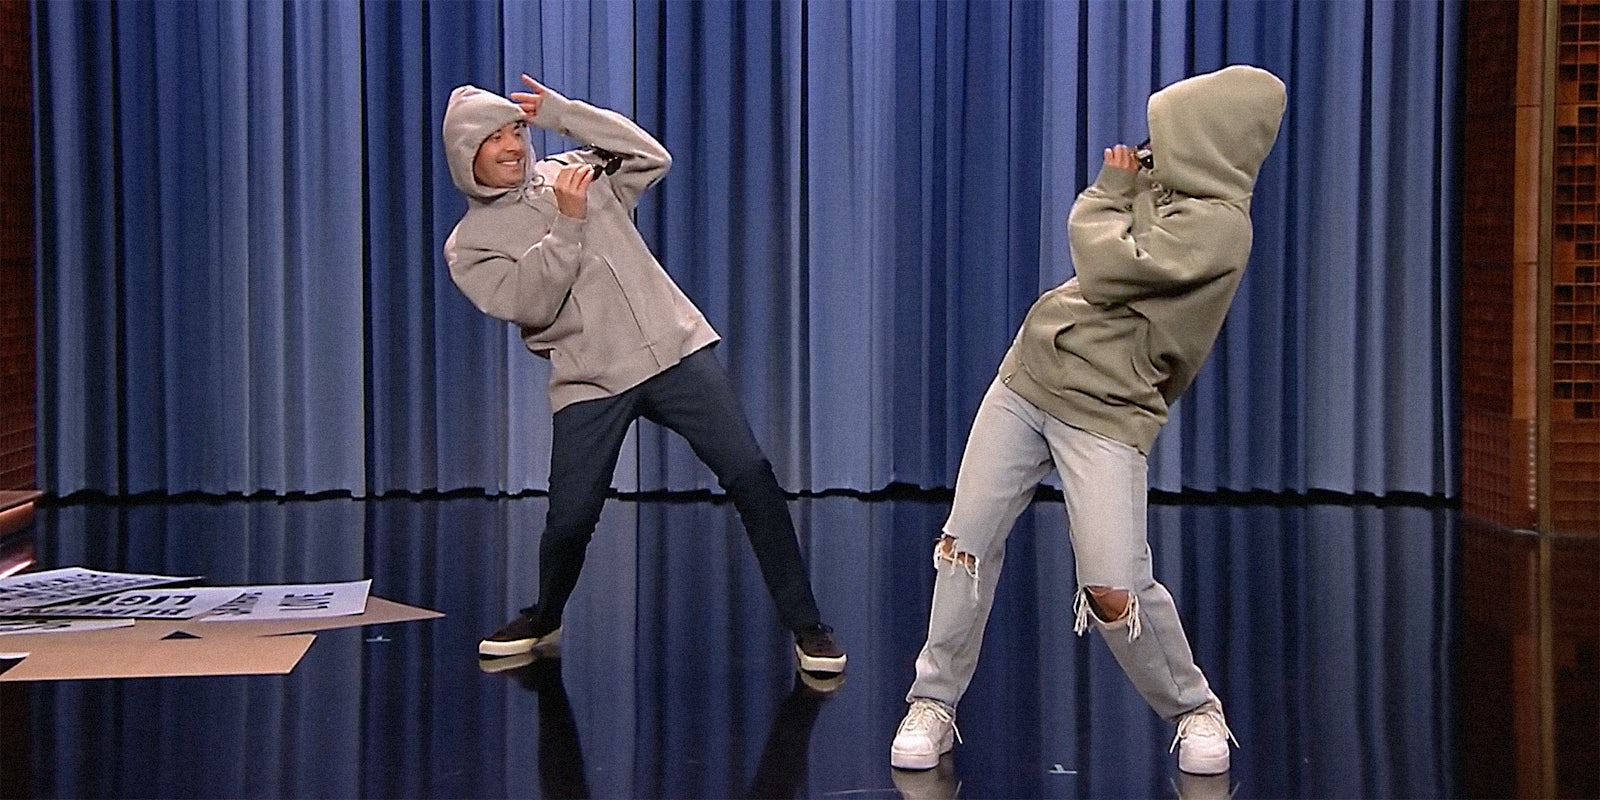 Jimmy Fallon and Addison Rae dancing on The Tonight Show.